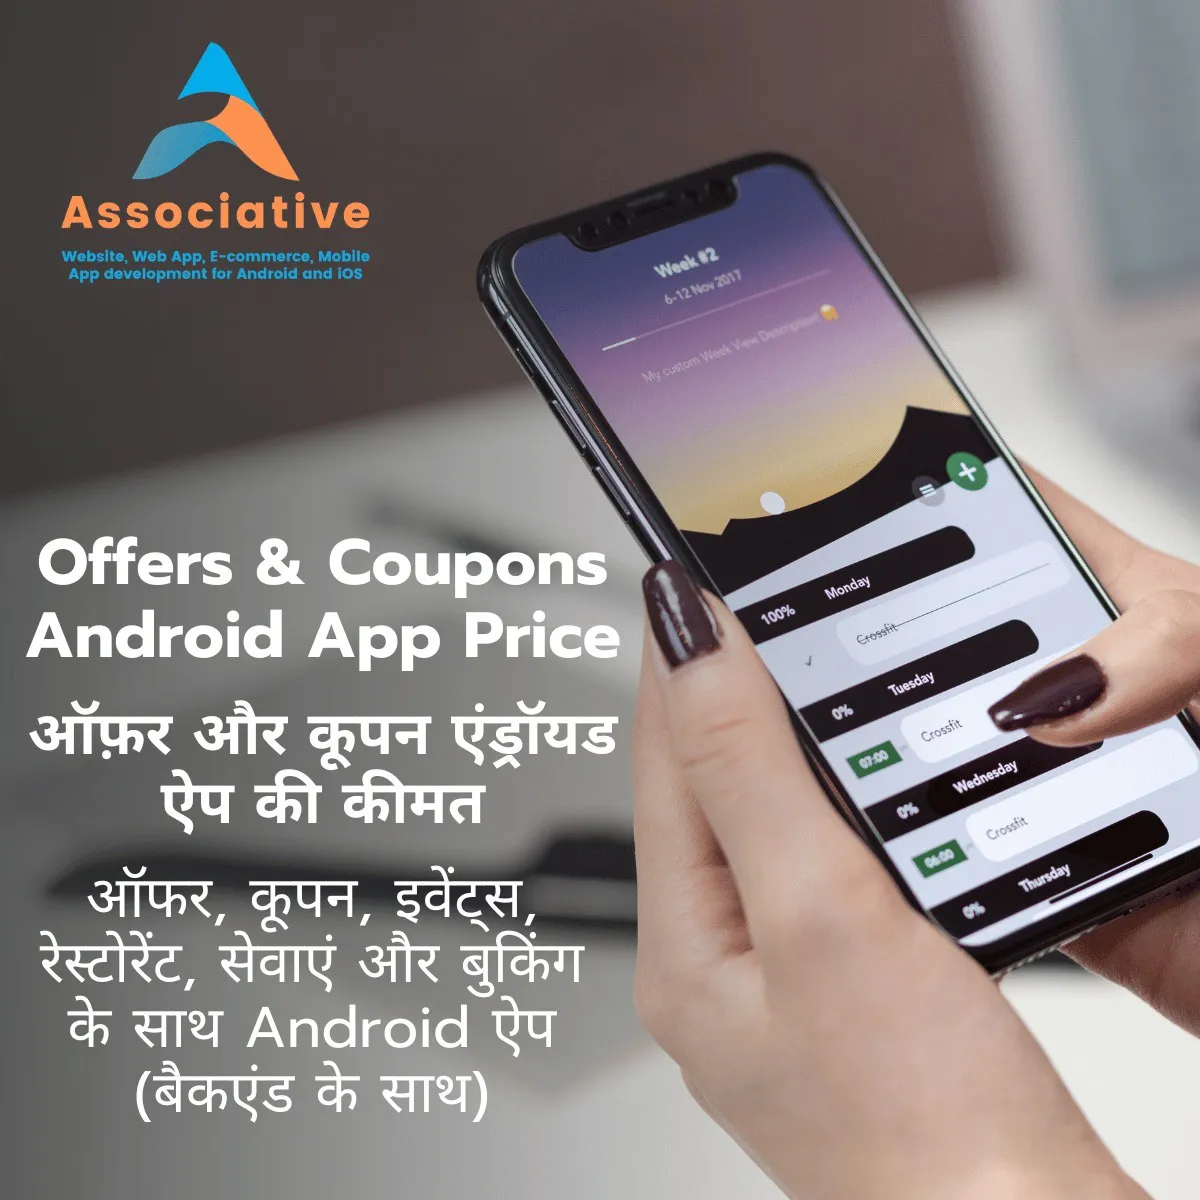 Offers & Coupons Android App